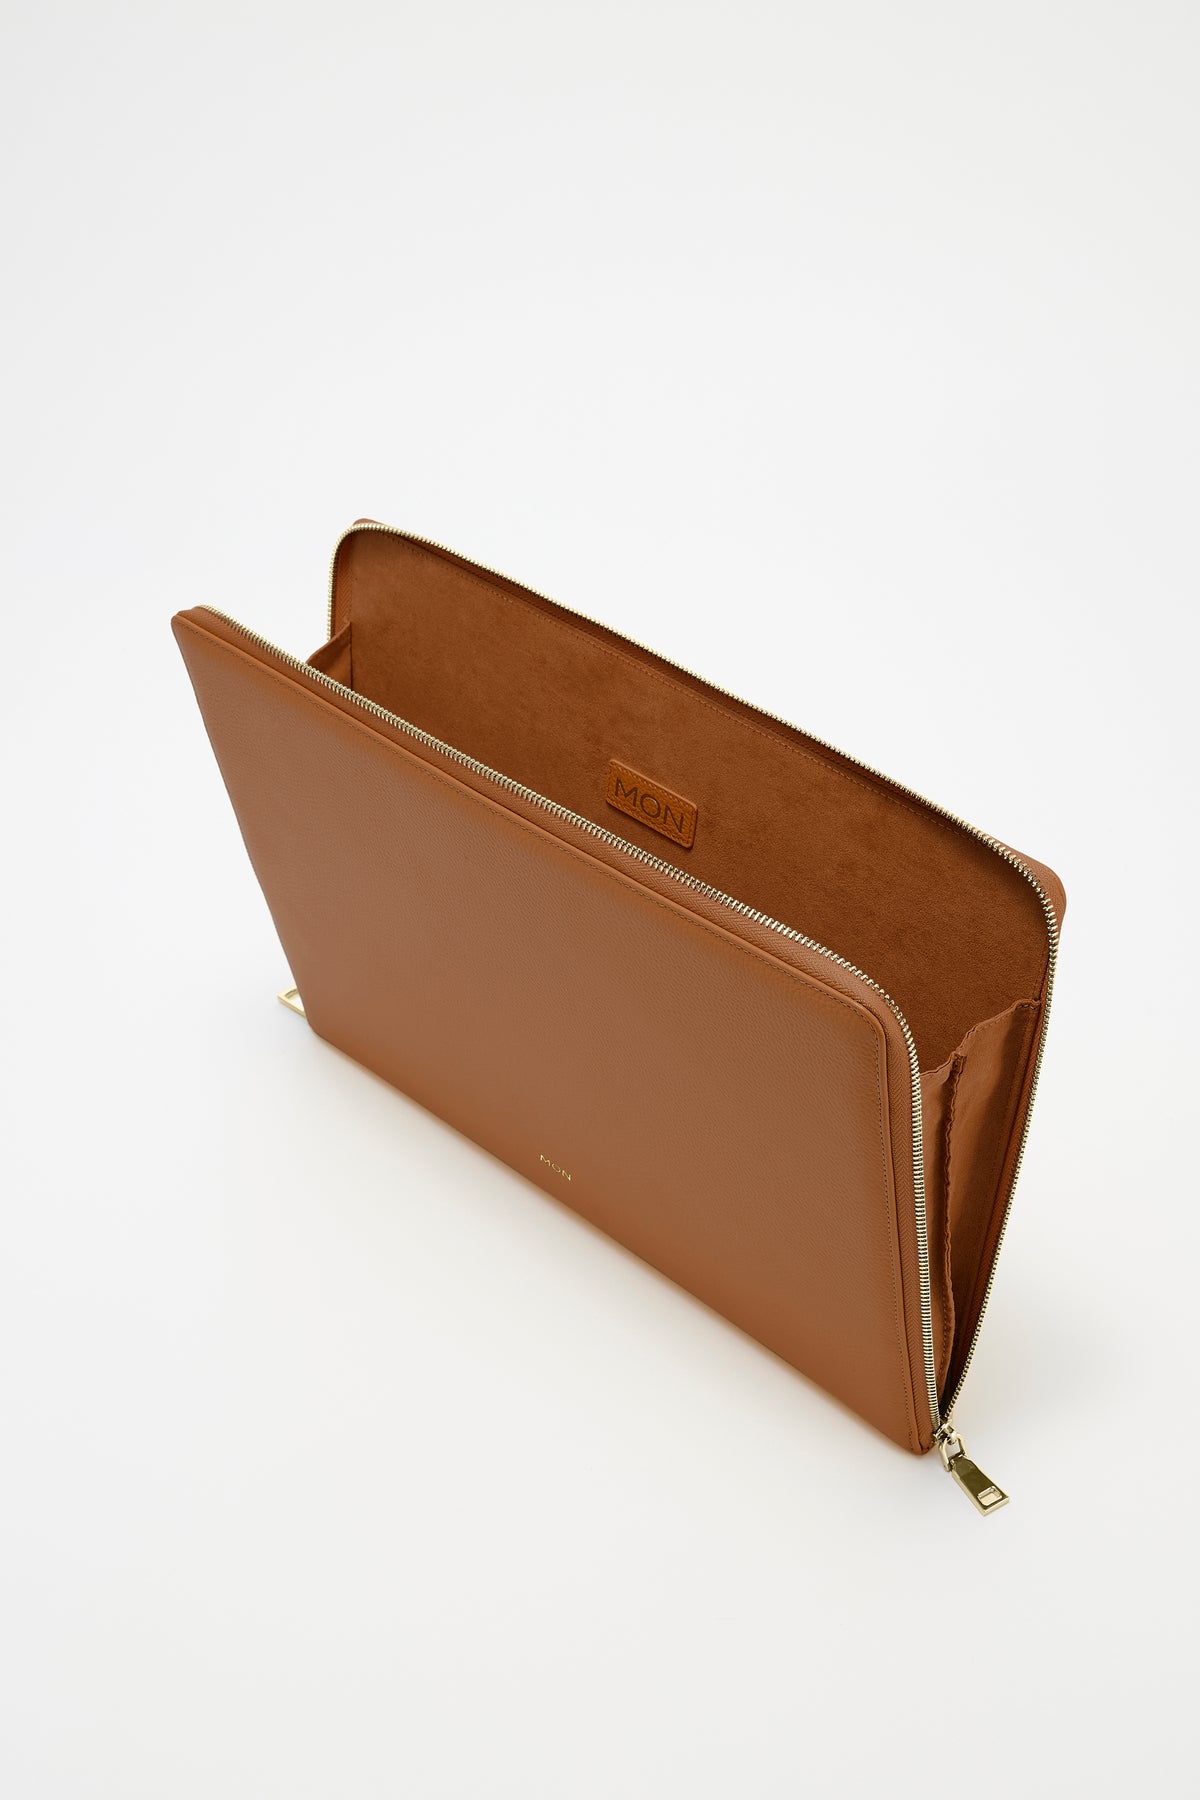 16" Padded Leather Laptop Case | Tan Gold